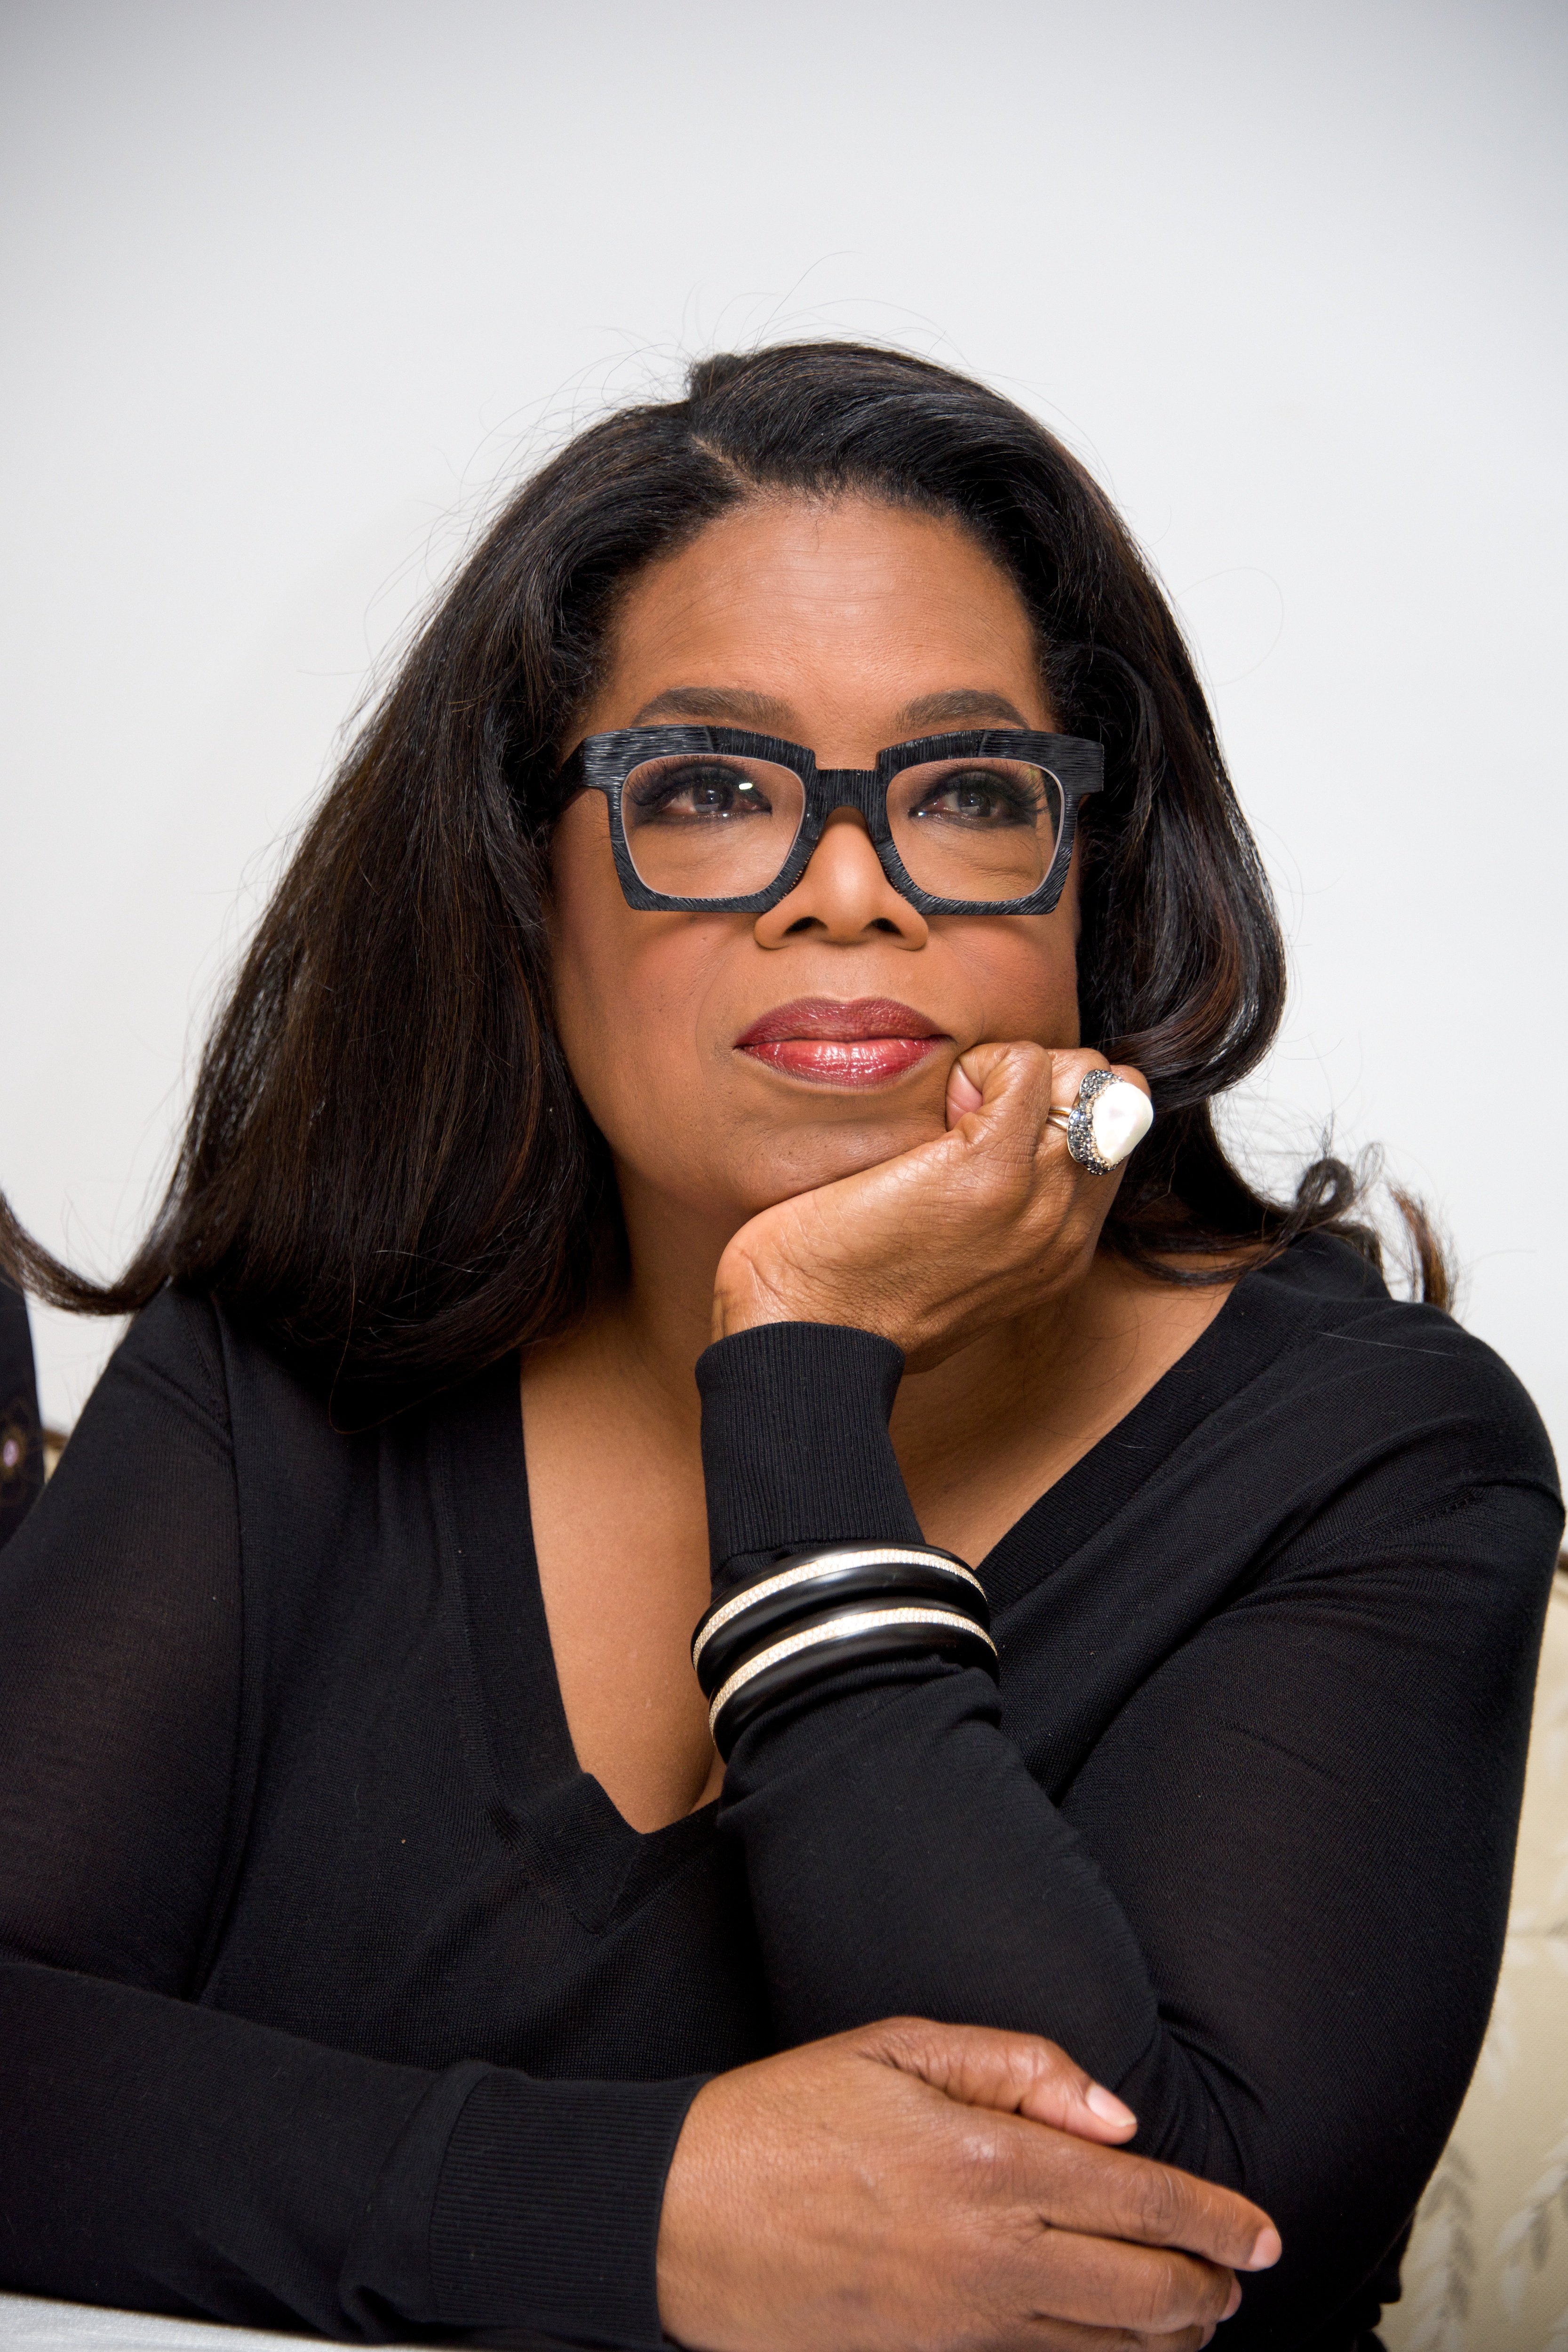 Oprah Winfrey at the "Greenleaf" Press Conference held at the Four Seasons Hotel on September 26, 2016 in Beverly Hills, California. | Source: Getty Images